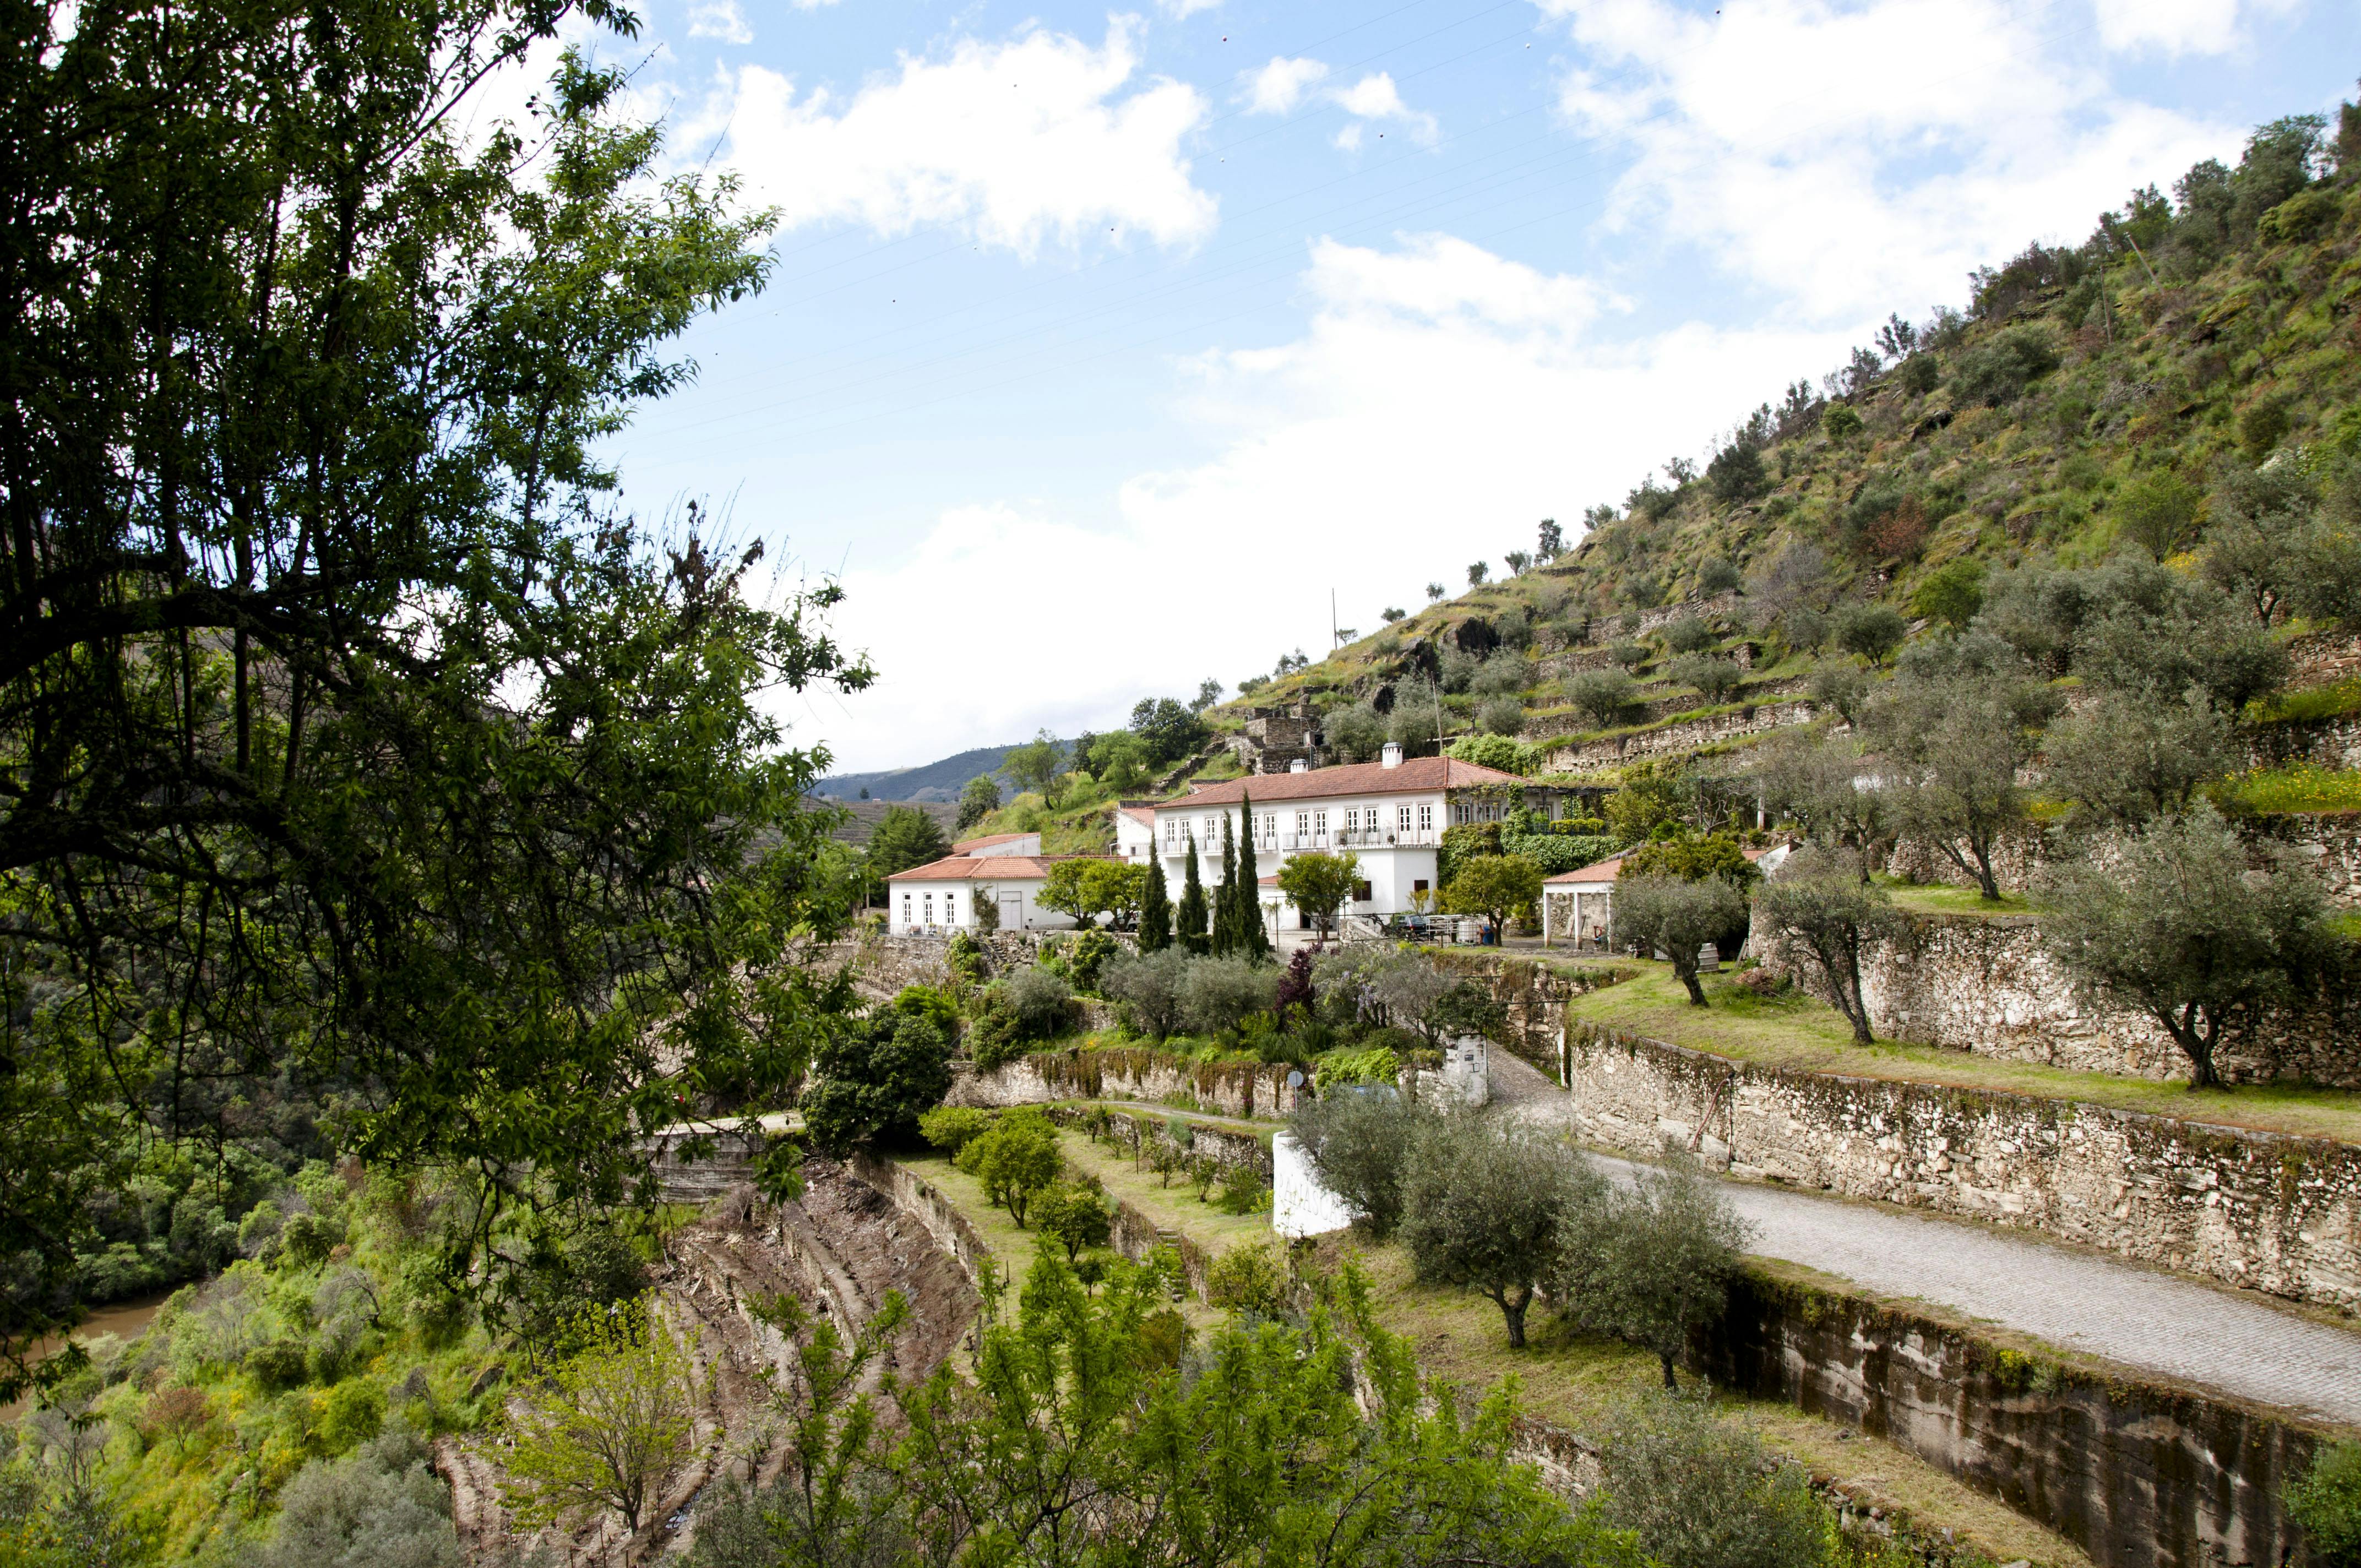 Douro valley tour - Wine tasting, lunch & river cruise-3